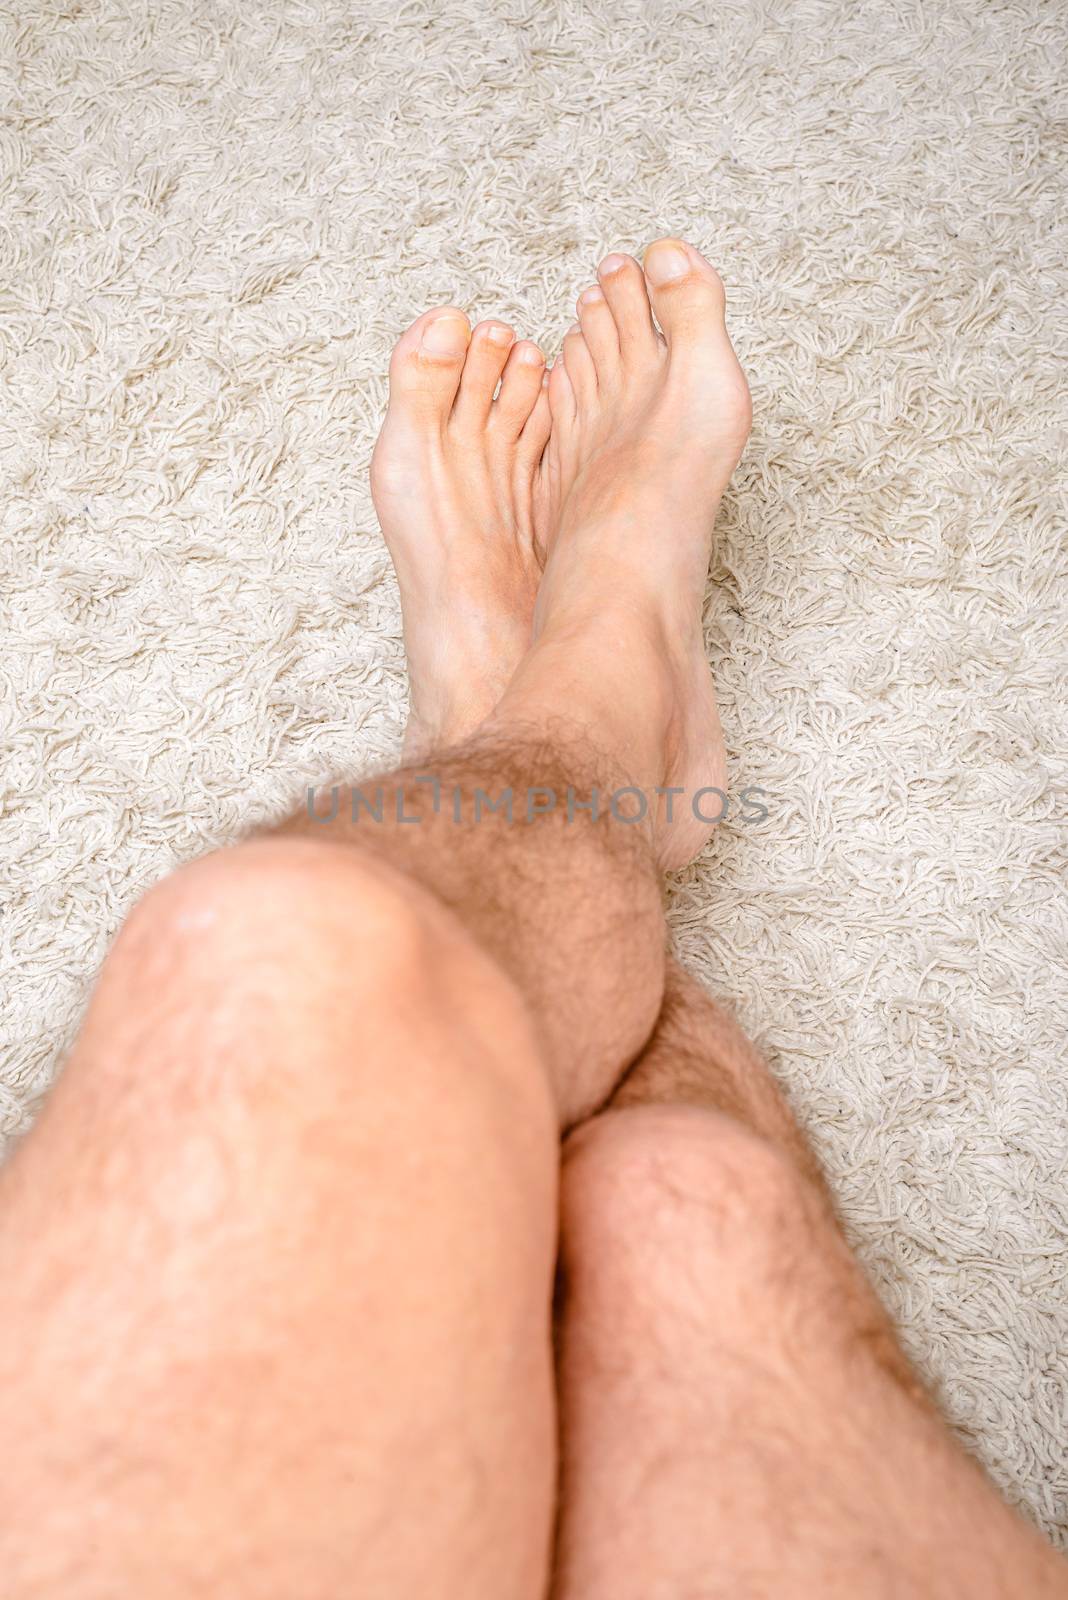 A man is relaxing, the feet on a warm wool carpet, and showing hairy legs